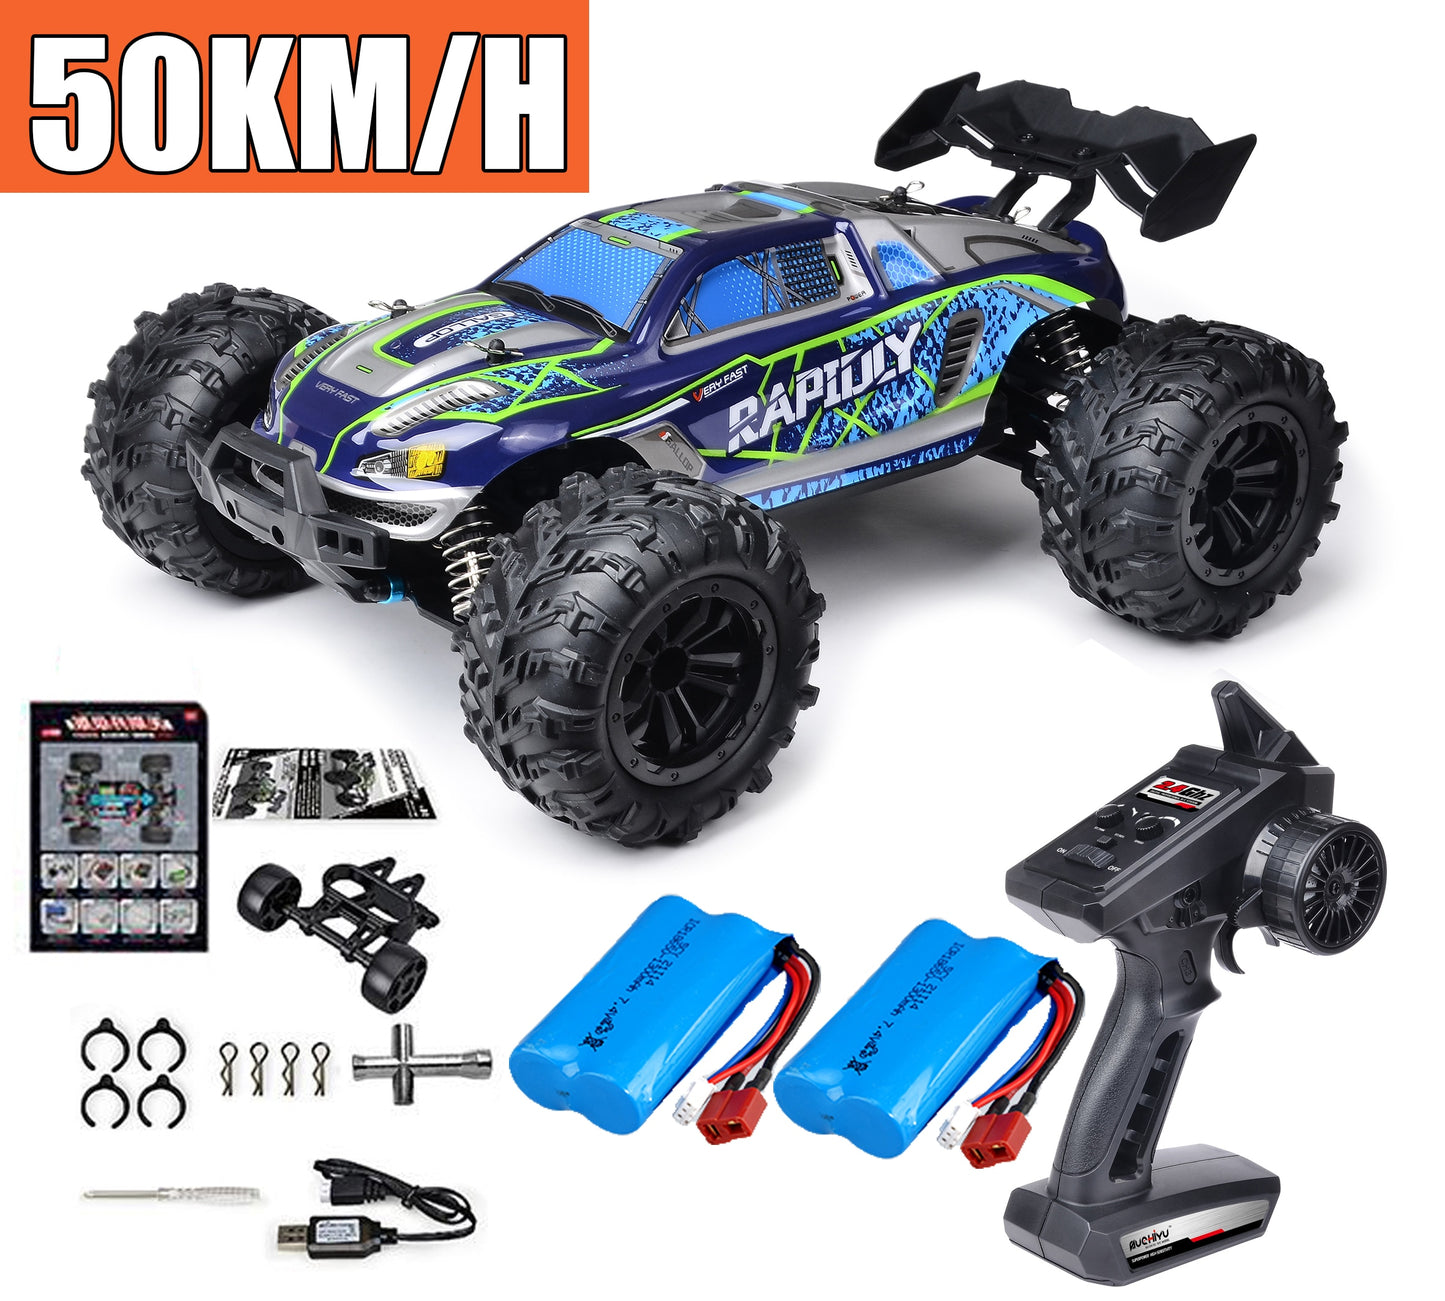 Rc Car Off Road 4x4 High Speed 75KM/H Remote Control Car - With LED Headlight Brushless 4WD 1/16 Monster Truck Toys For Boys Gift